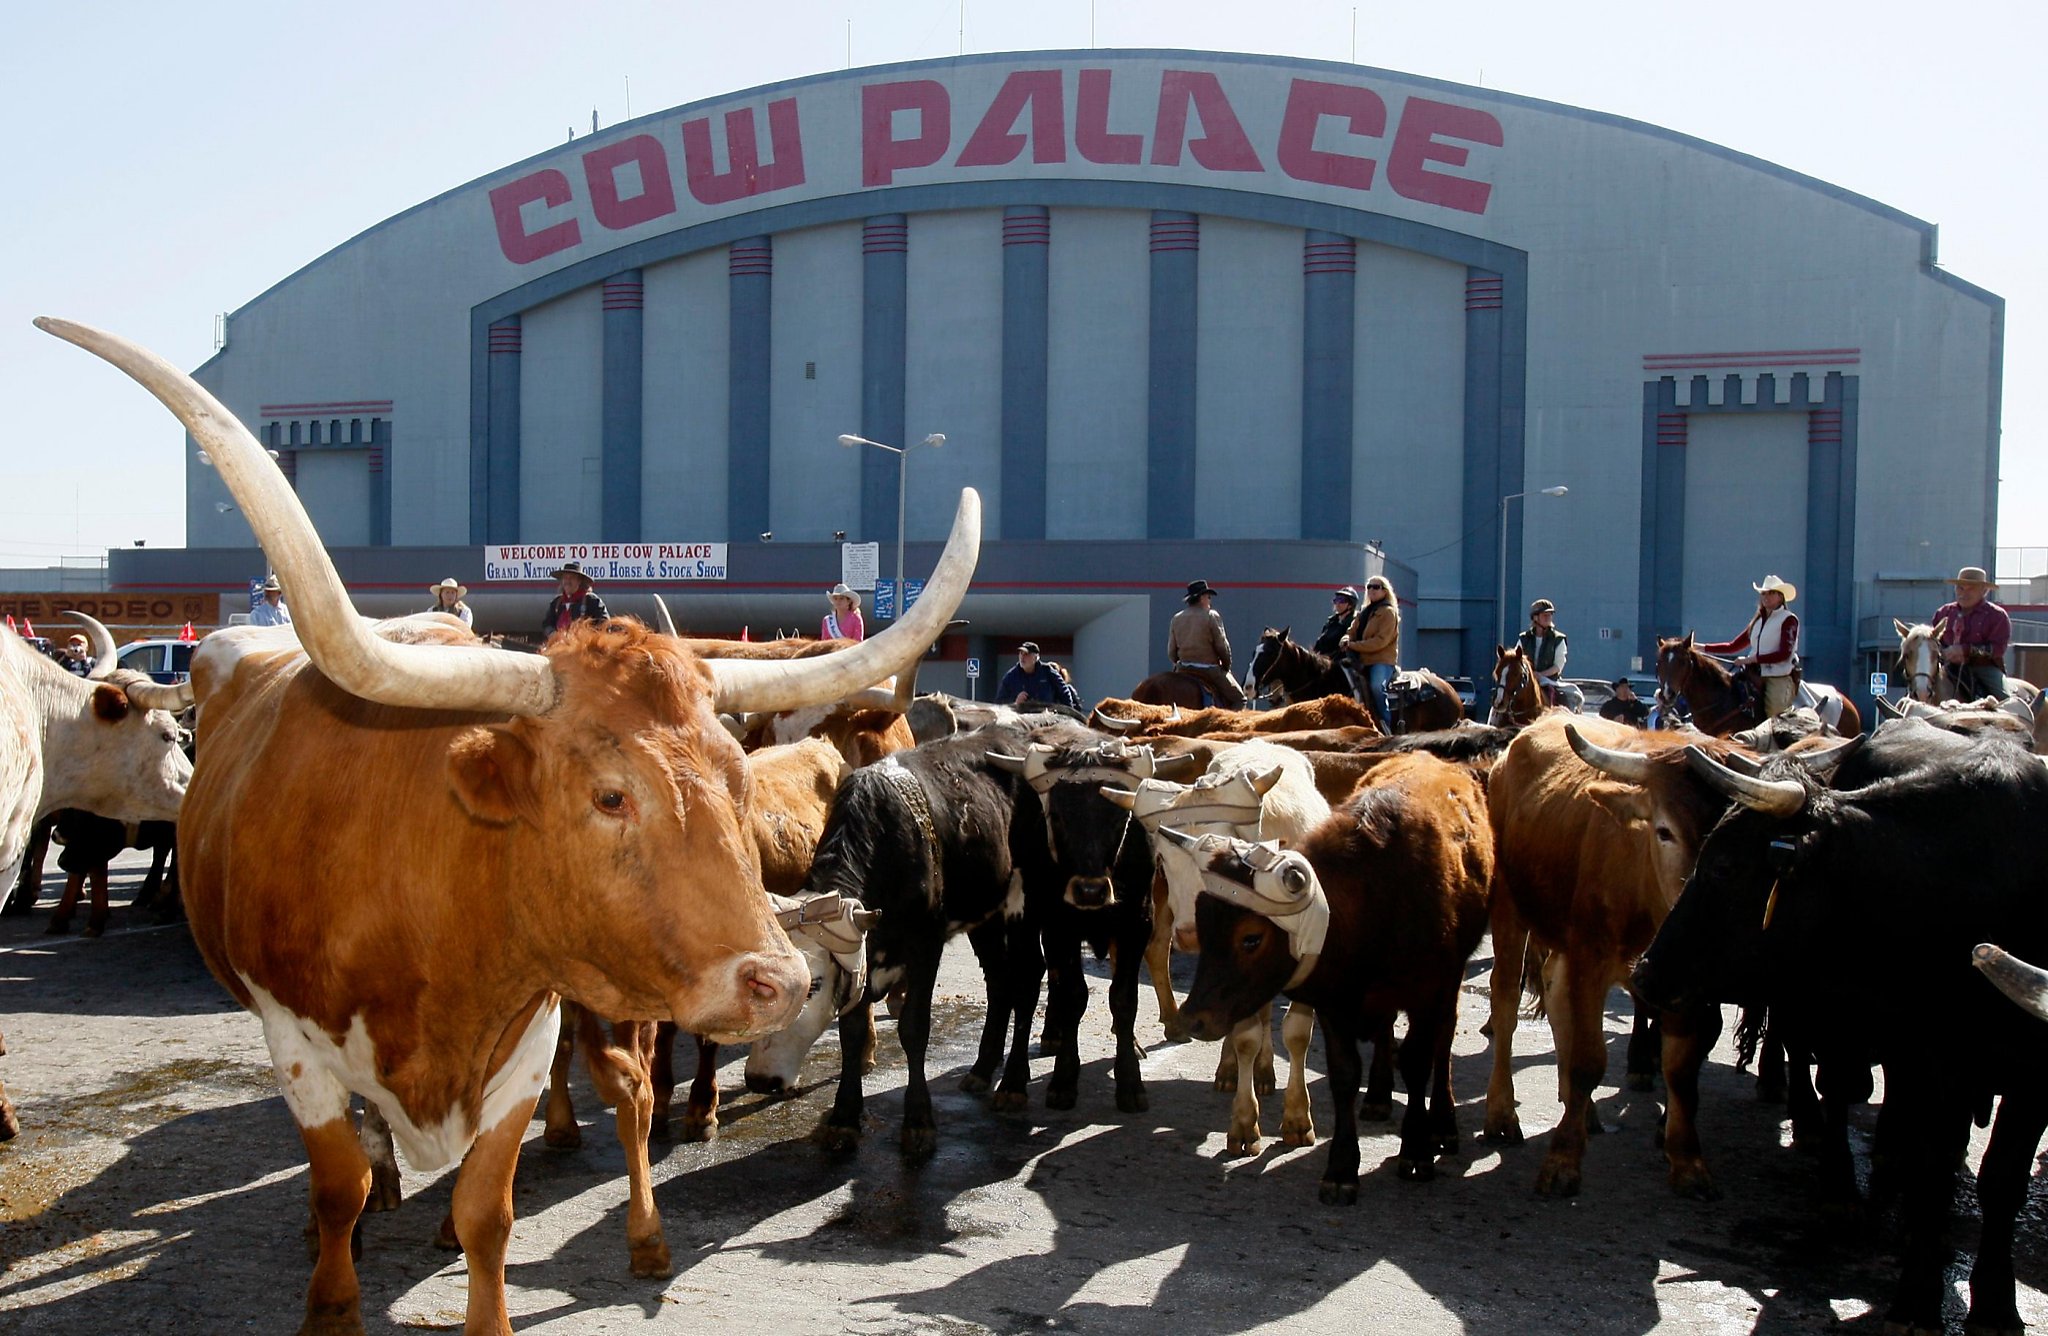 A herd of cattle pause in the Cow Palace parking lot after their arrival for the 63rd annual Grand National Rodeo, Horse & Stock Show in Daly City